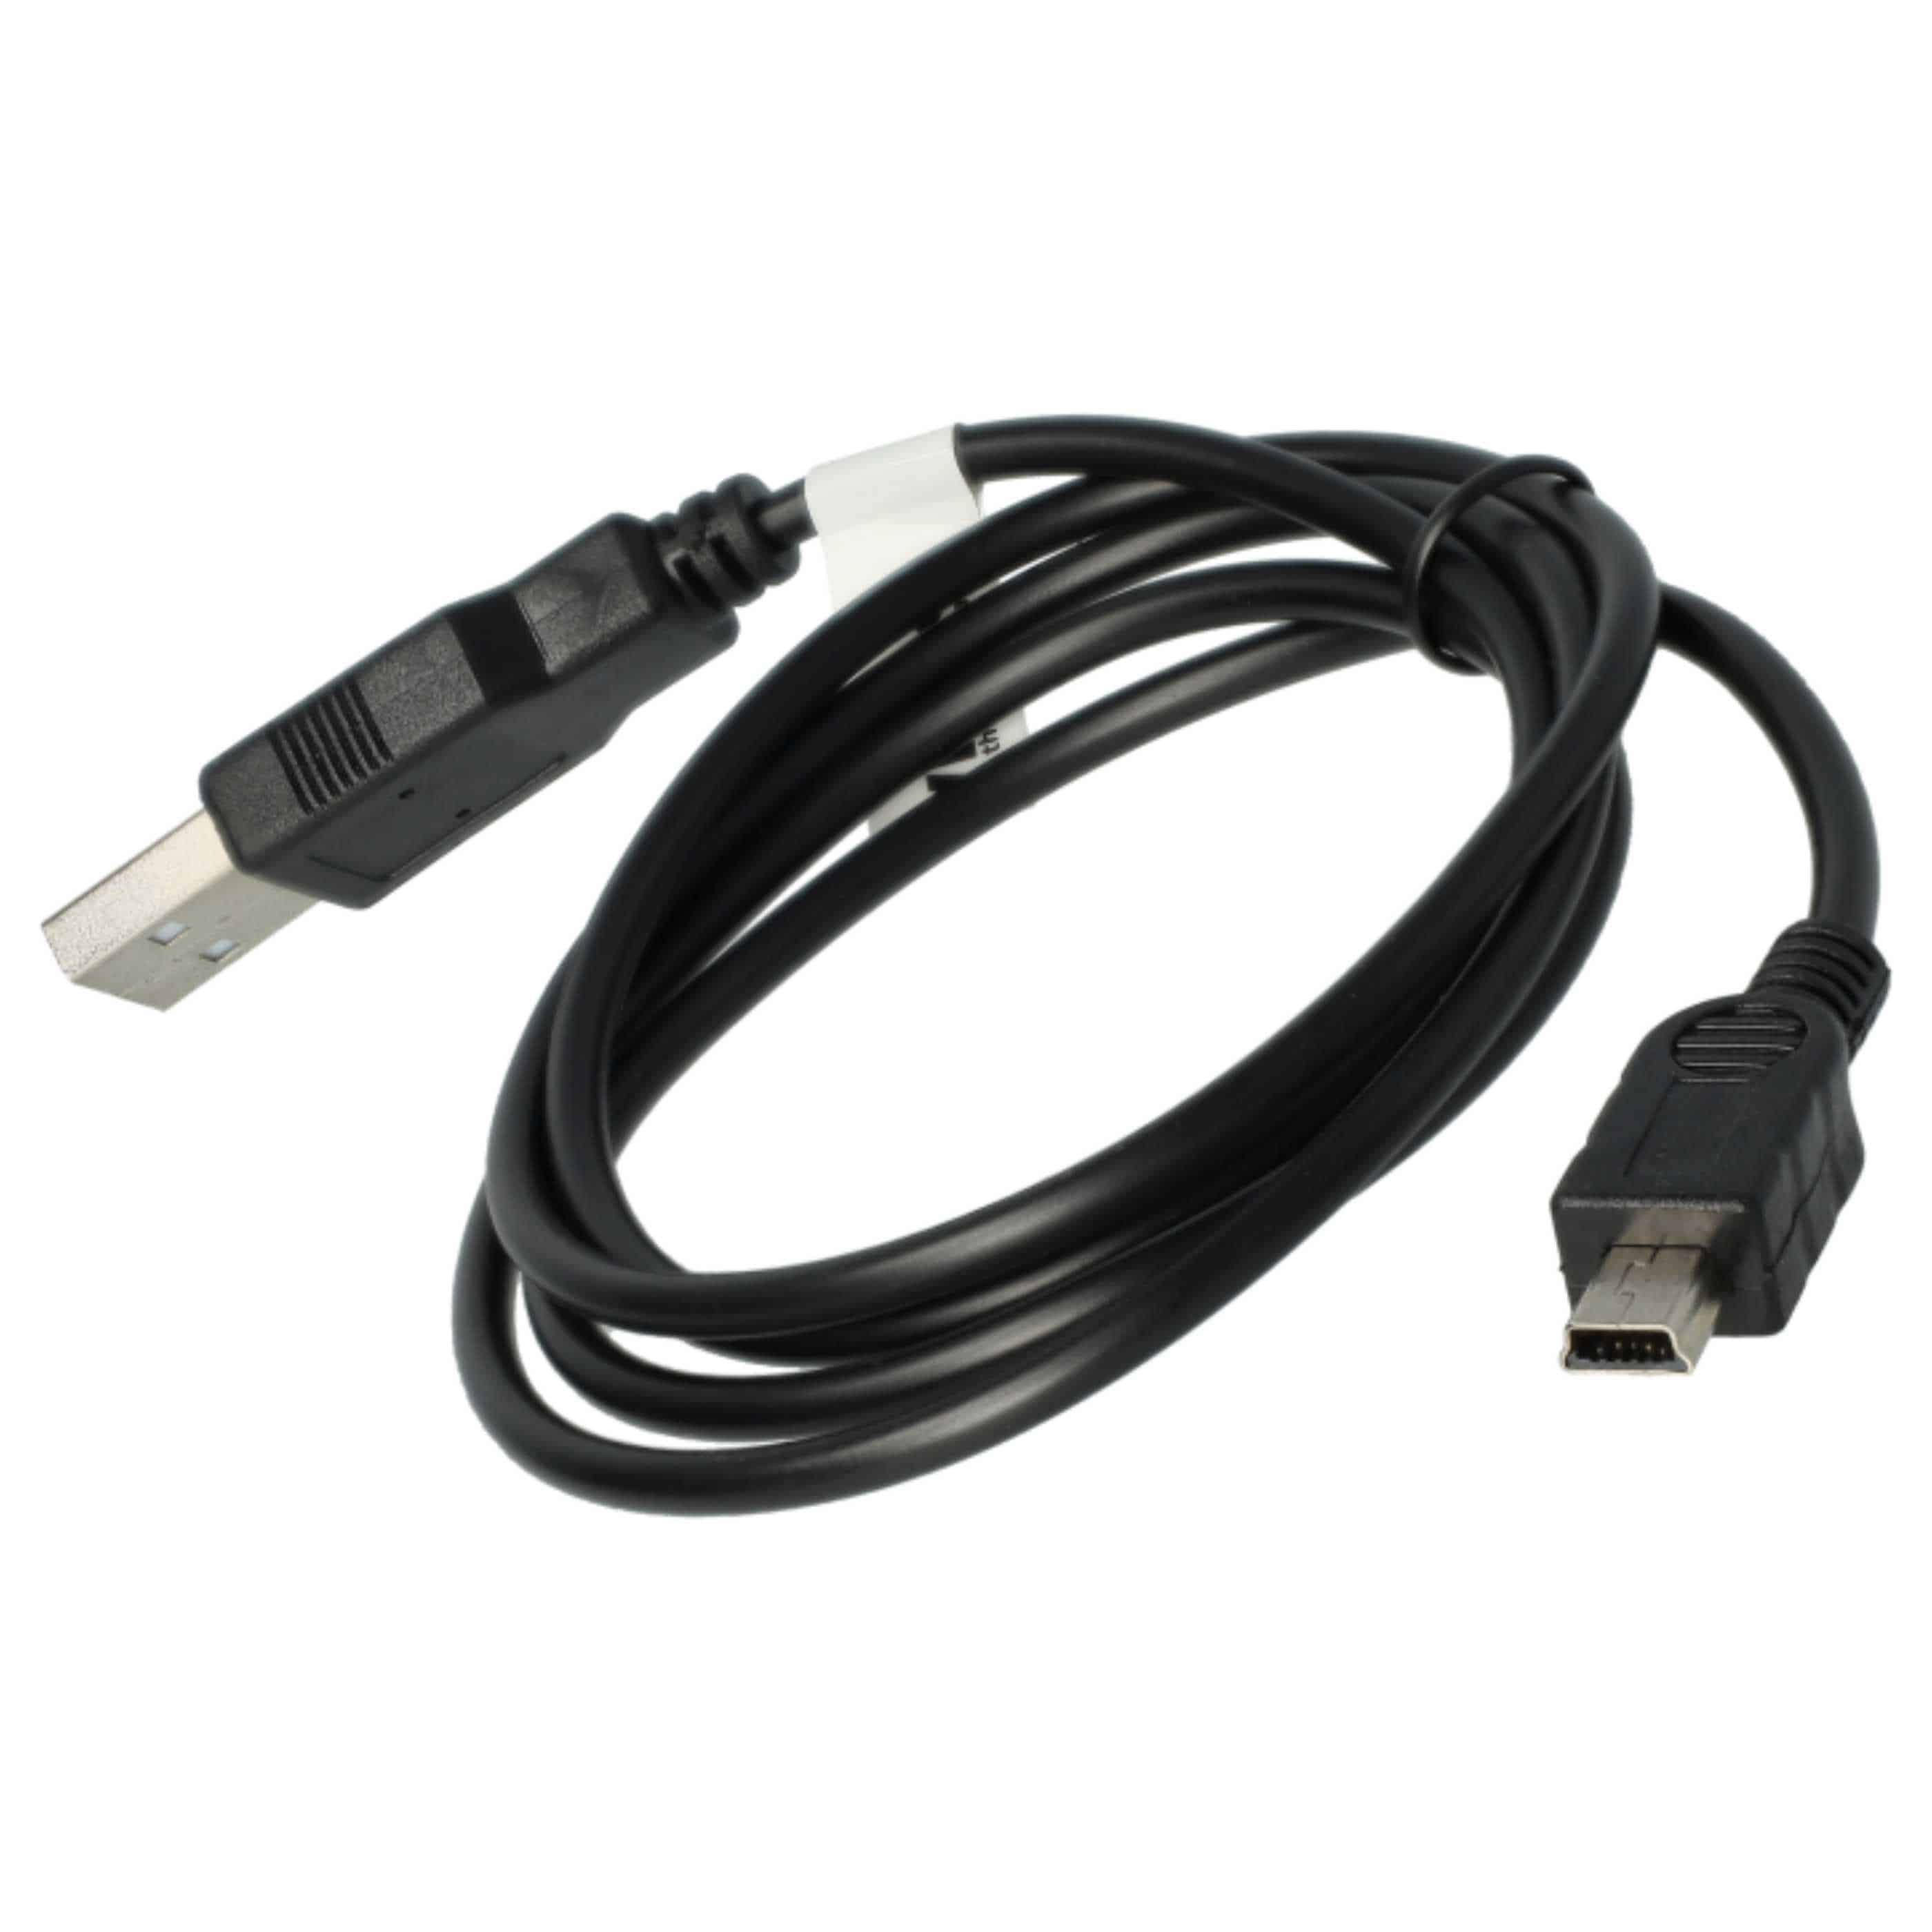 USB data cable suitable for Nokia E51 phone - charger 2in1, 100cm